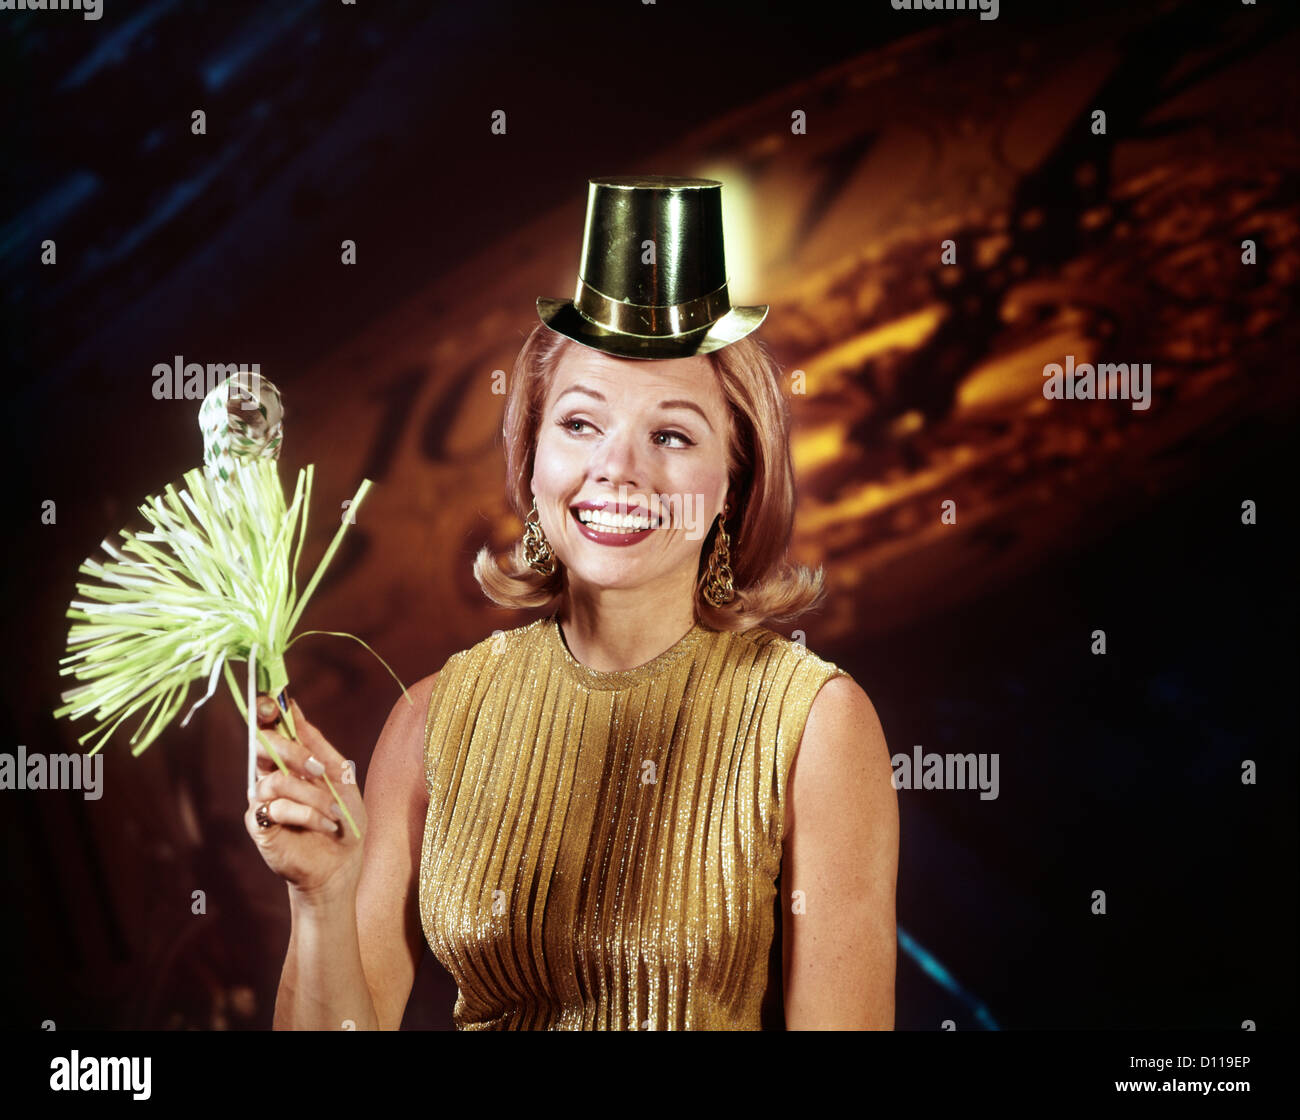 1960s YOUNG BLONDE WOMAN PARTY HAT NOISEMAKER HORN SMILING NEW YEAR CLOCK BACKGROUND Stock Photo